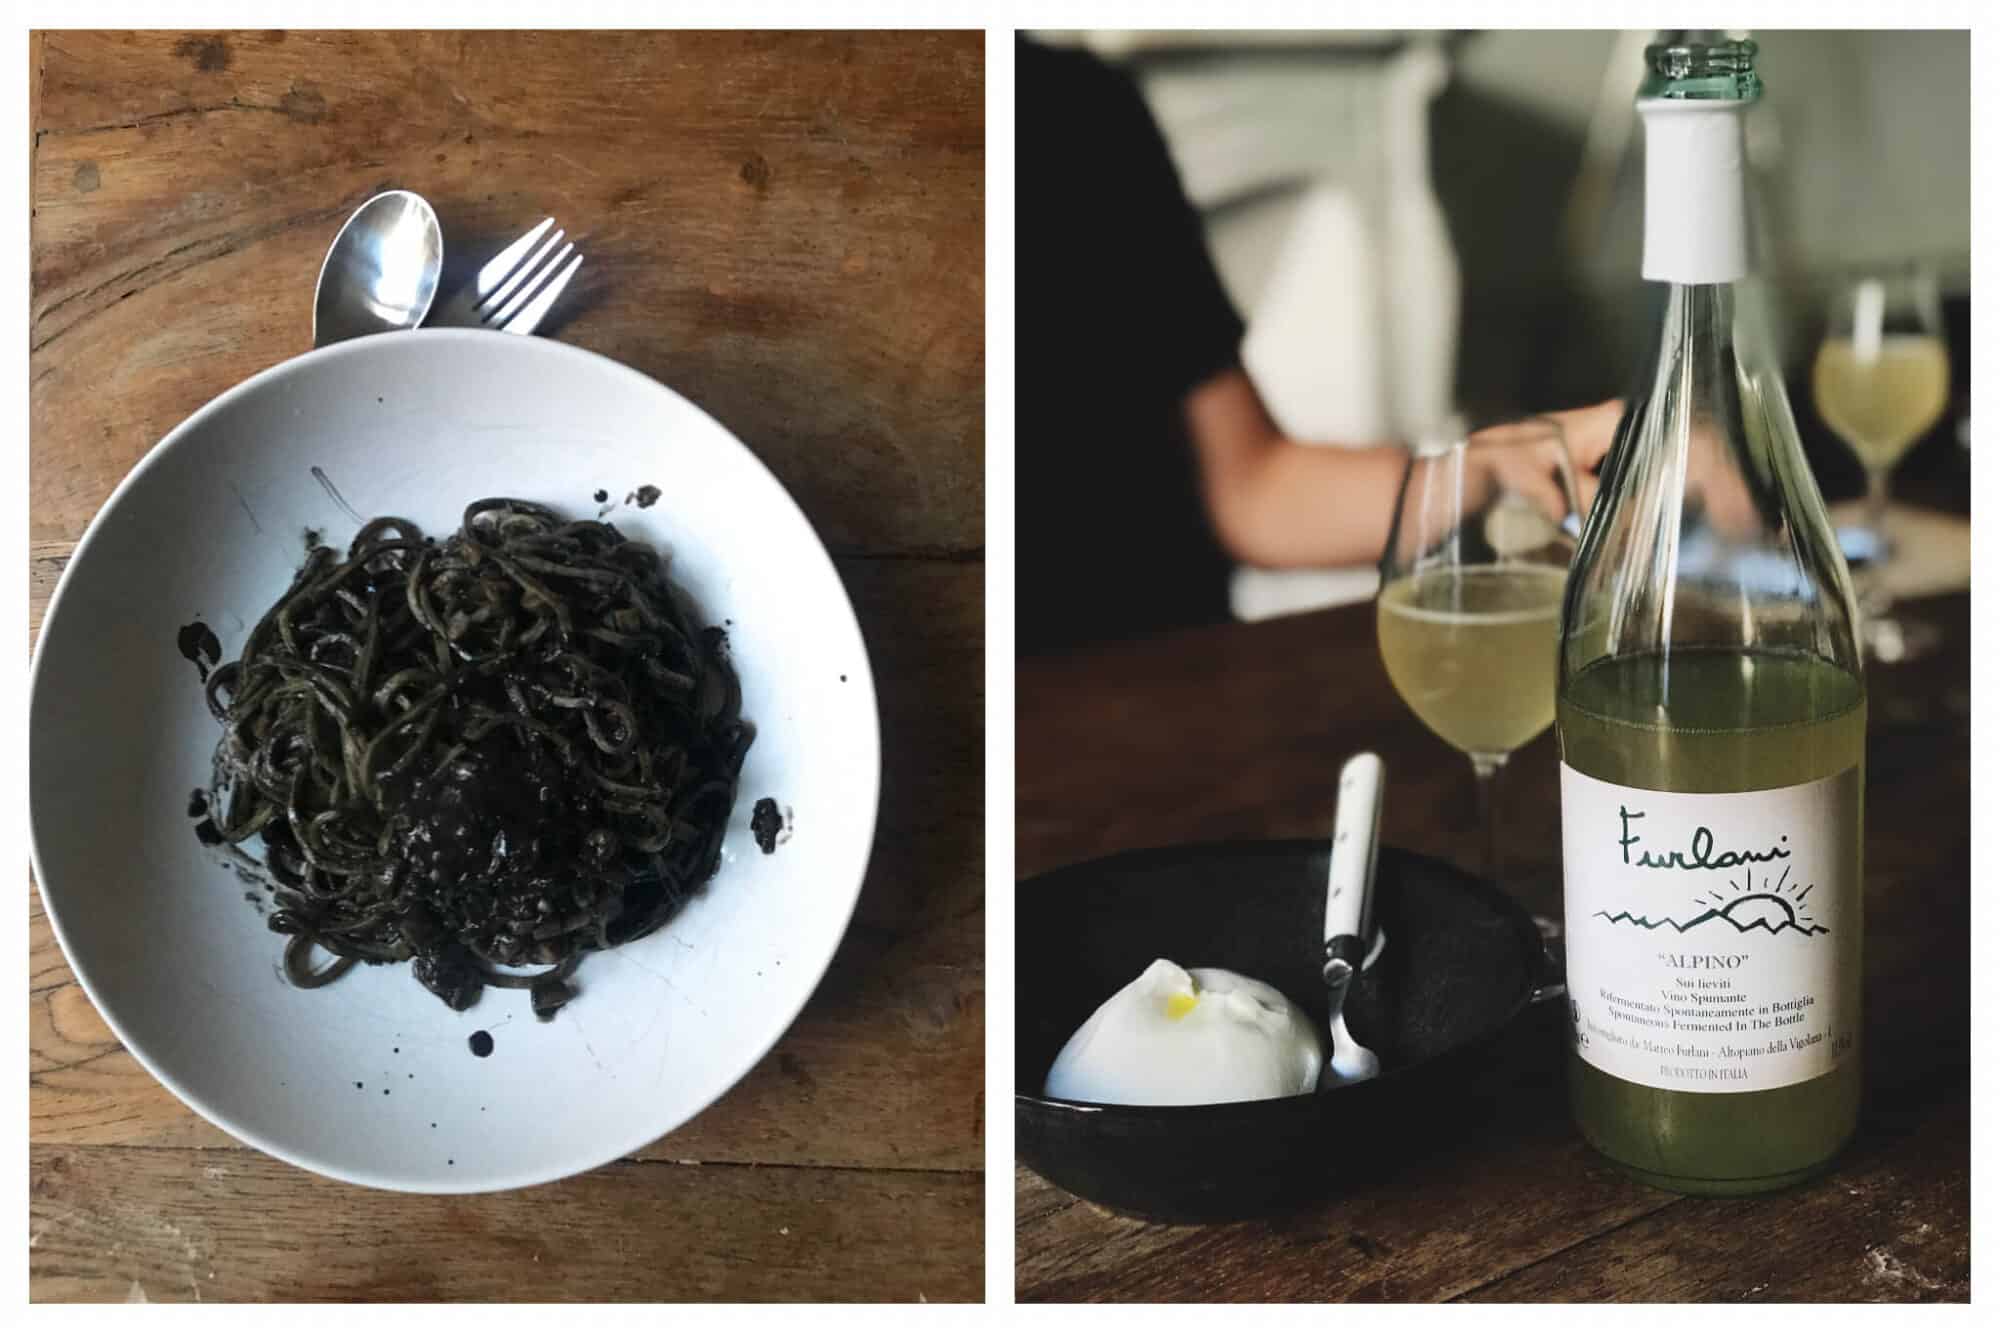 Left: squid ink pasta in a white plate on a timber table. Right: a ball of mozzarella and a bottle of white whine from Passerini. 